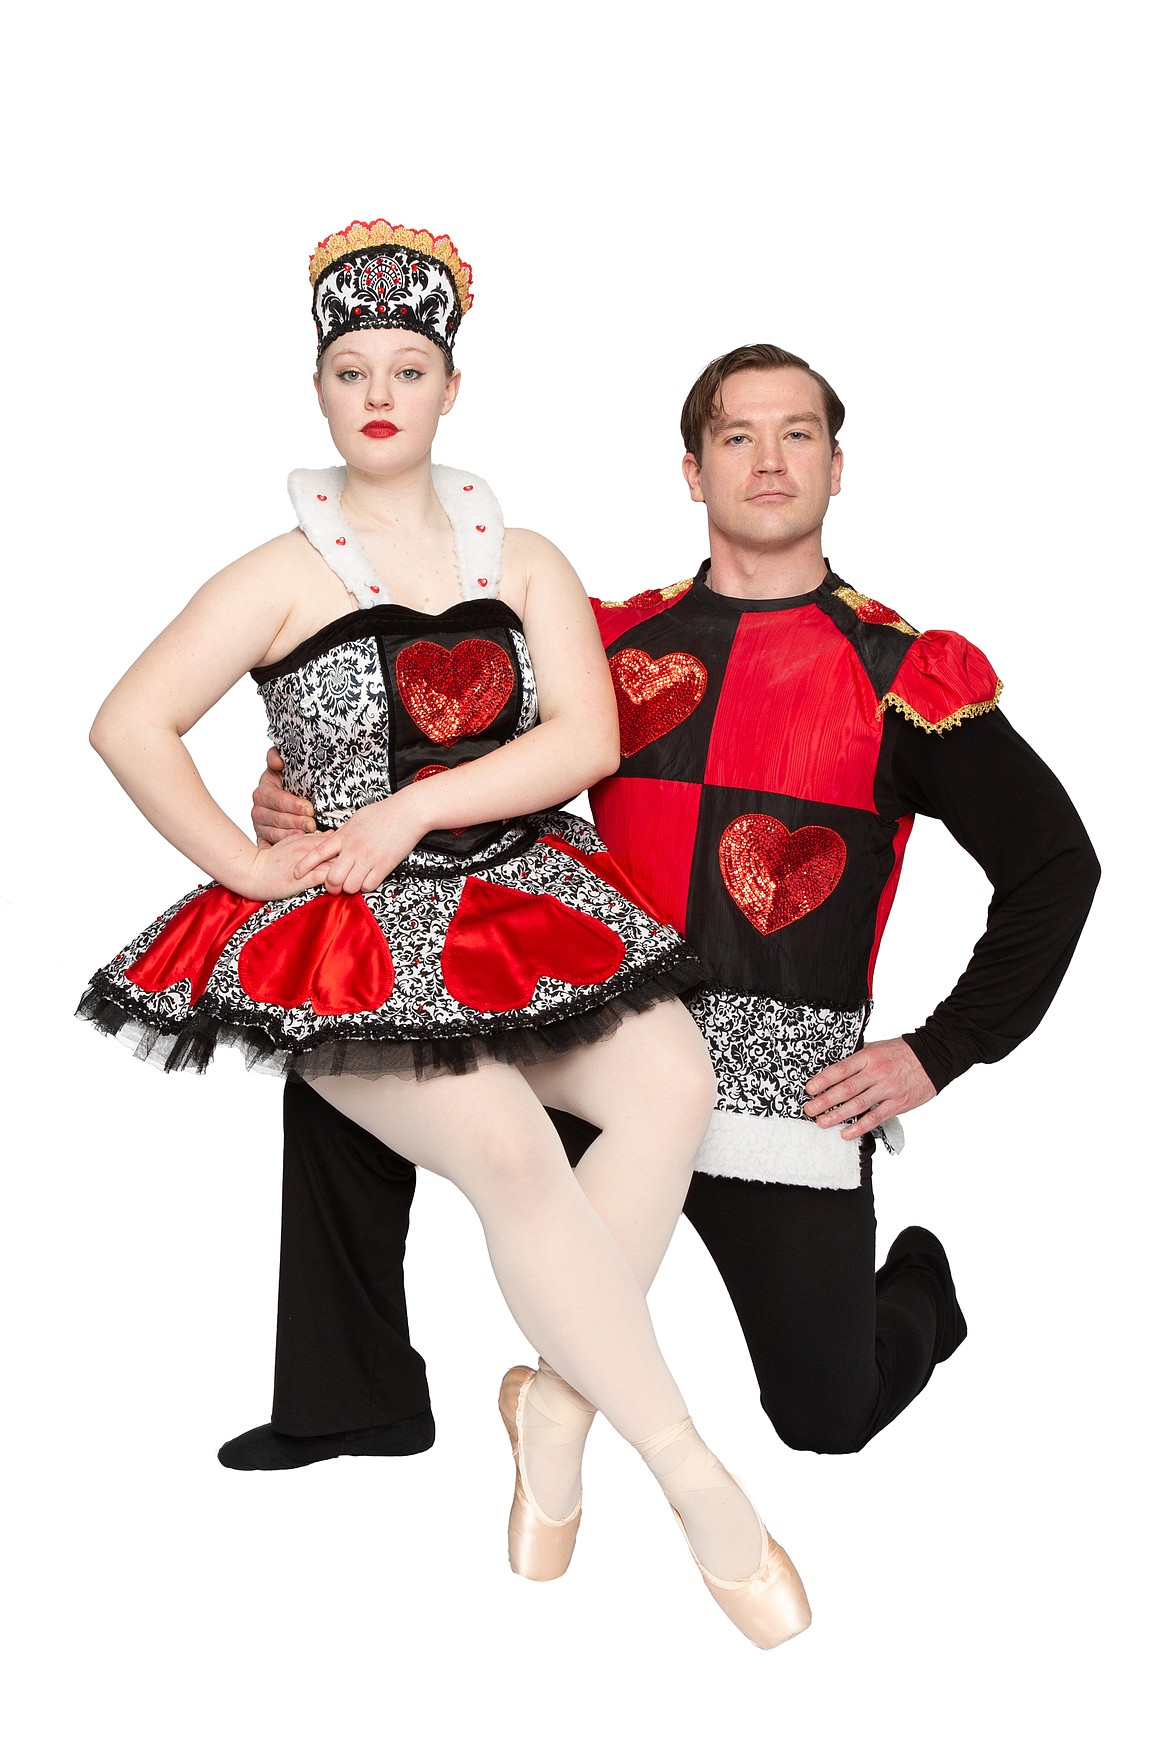 Northwest Ballet Company principal Savanah Brewer as the Queen of Hearts and Northwest Ballet Company guest Malachi Bennetts as the King of Hearts. (Photo courtesy of Digital Montana Photography)